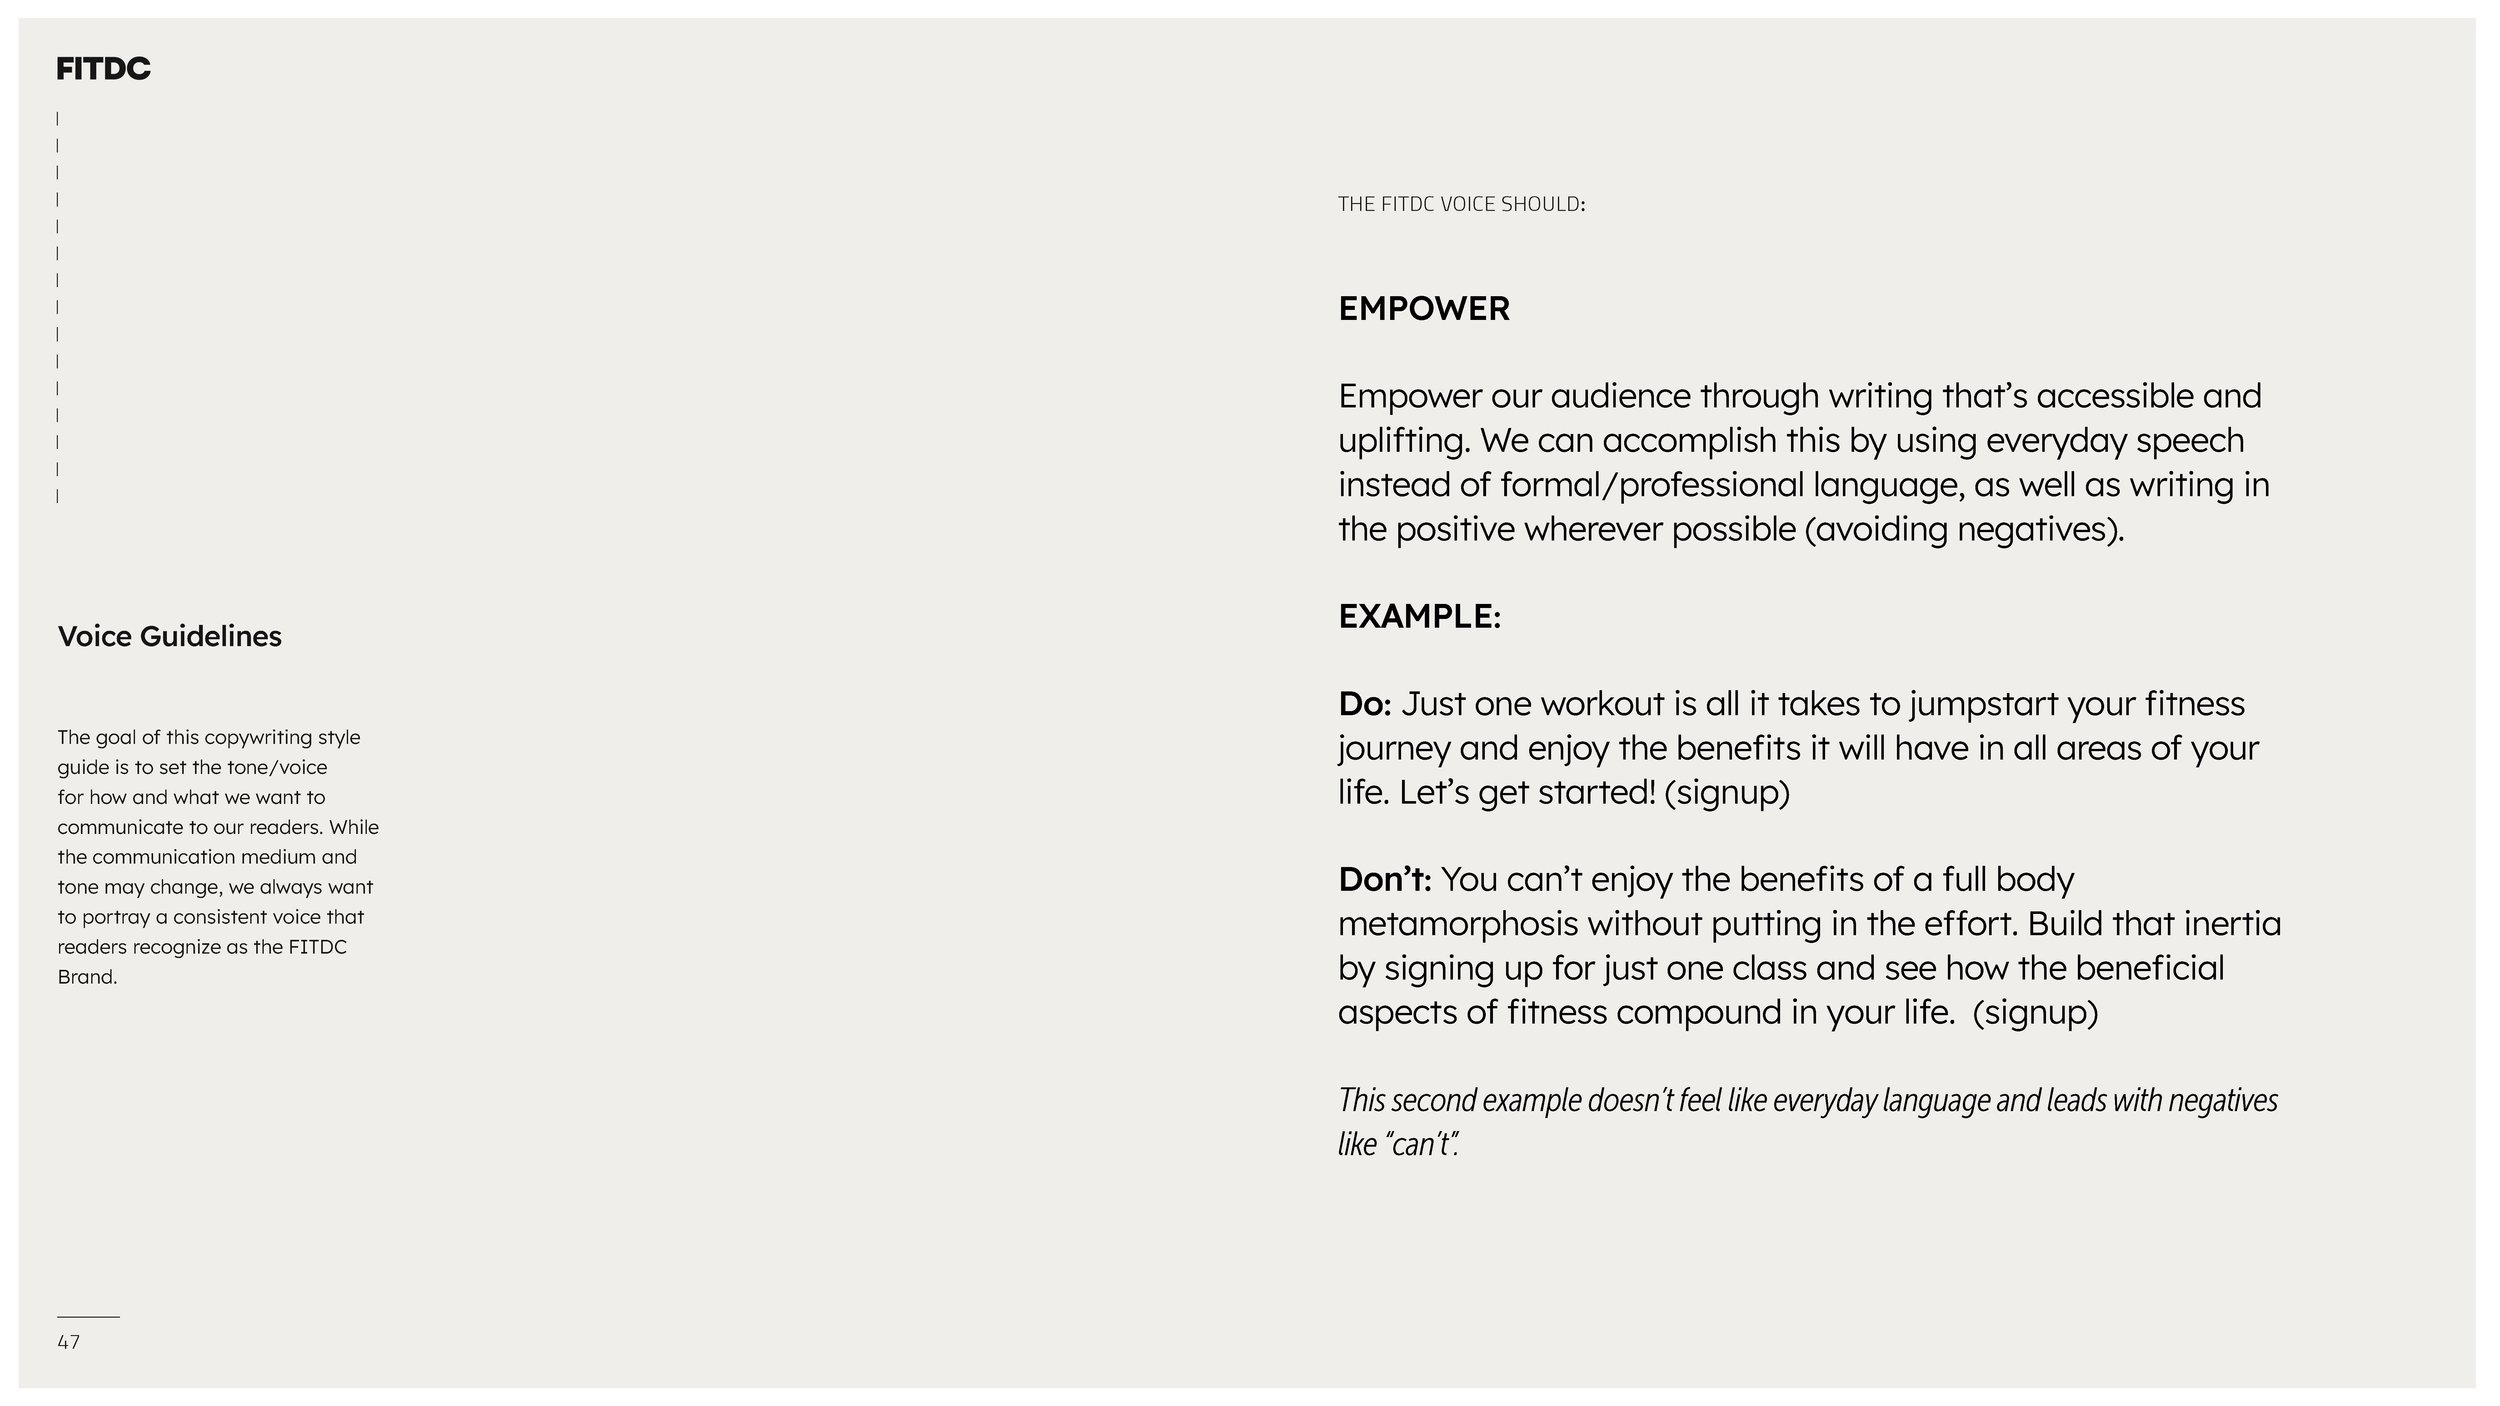 FITDC_Brand Guidelines_3.7_Page_47.jpg